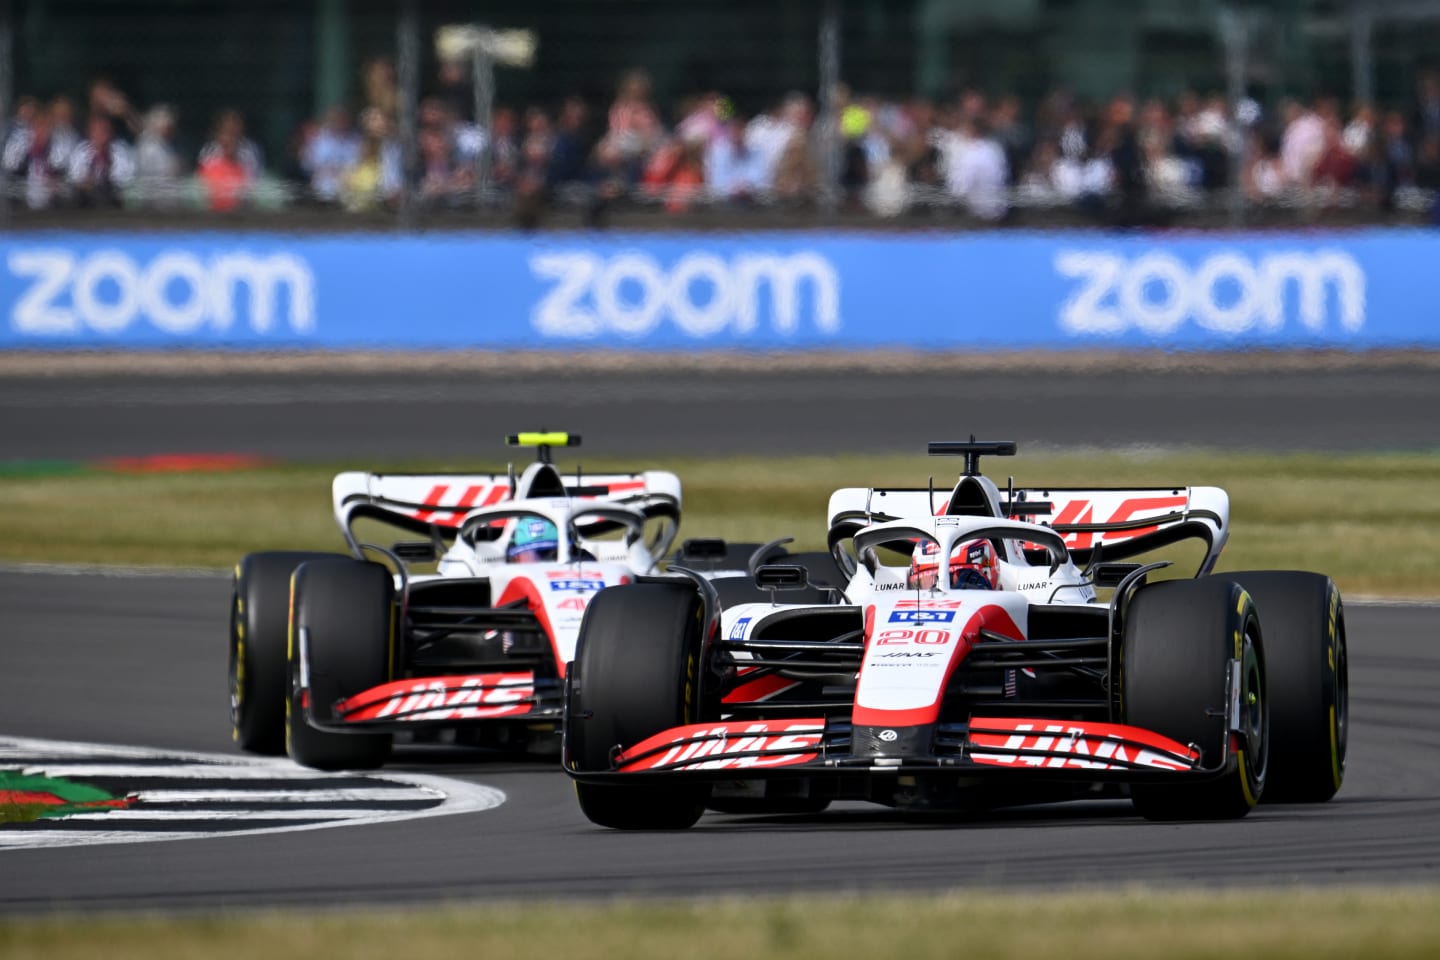 NORTHAMPTON, ENGLAND - JULY 03: Kevin Magnussen of Denmark driving the (20) Haas F1 VF-22 Ferrari leads Mick Schumacher of Germany driving the (47) Haas F1 VF-22 Ferrari on track during the F1 Grand Prix of Great Britain at Silverstone on July 03, 2022 in Northampton, England. (Photo by Clive Mason/Getty Images)